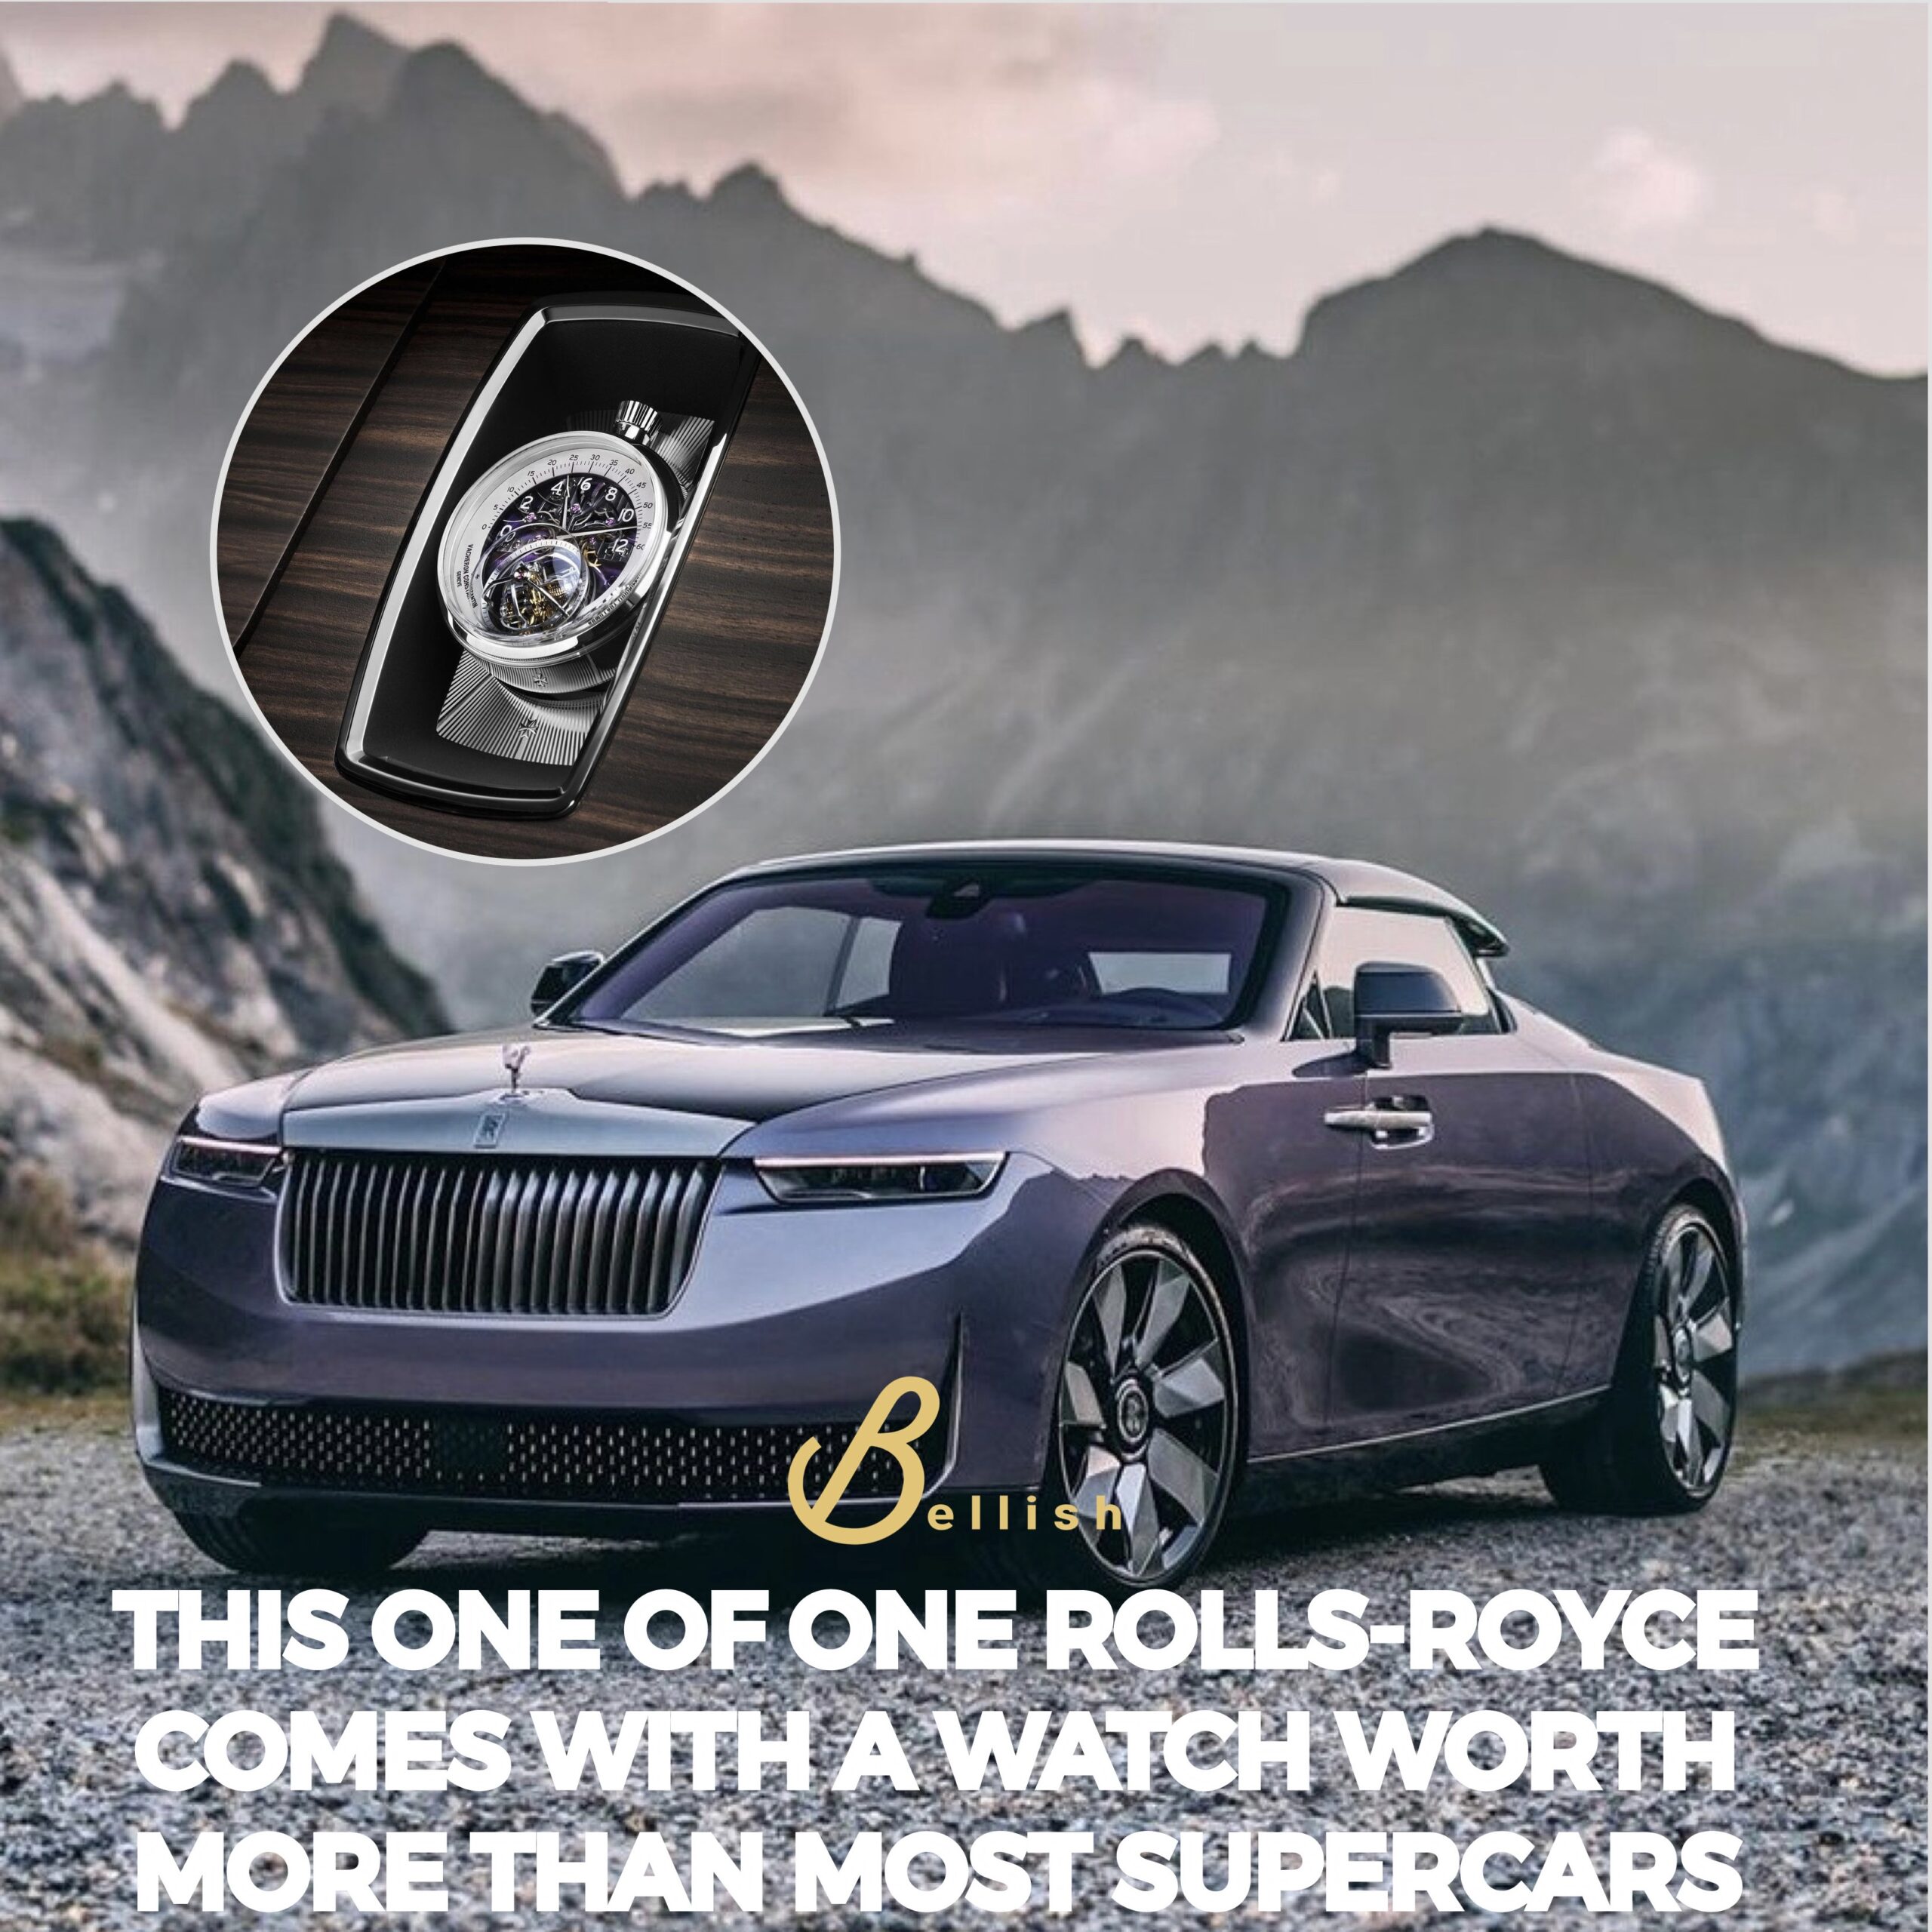 THE ONE OF ONE ROLLS ROYCE WITH A WATCH